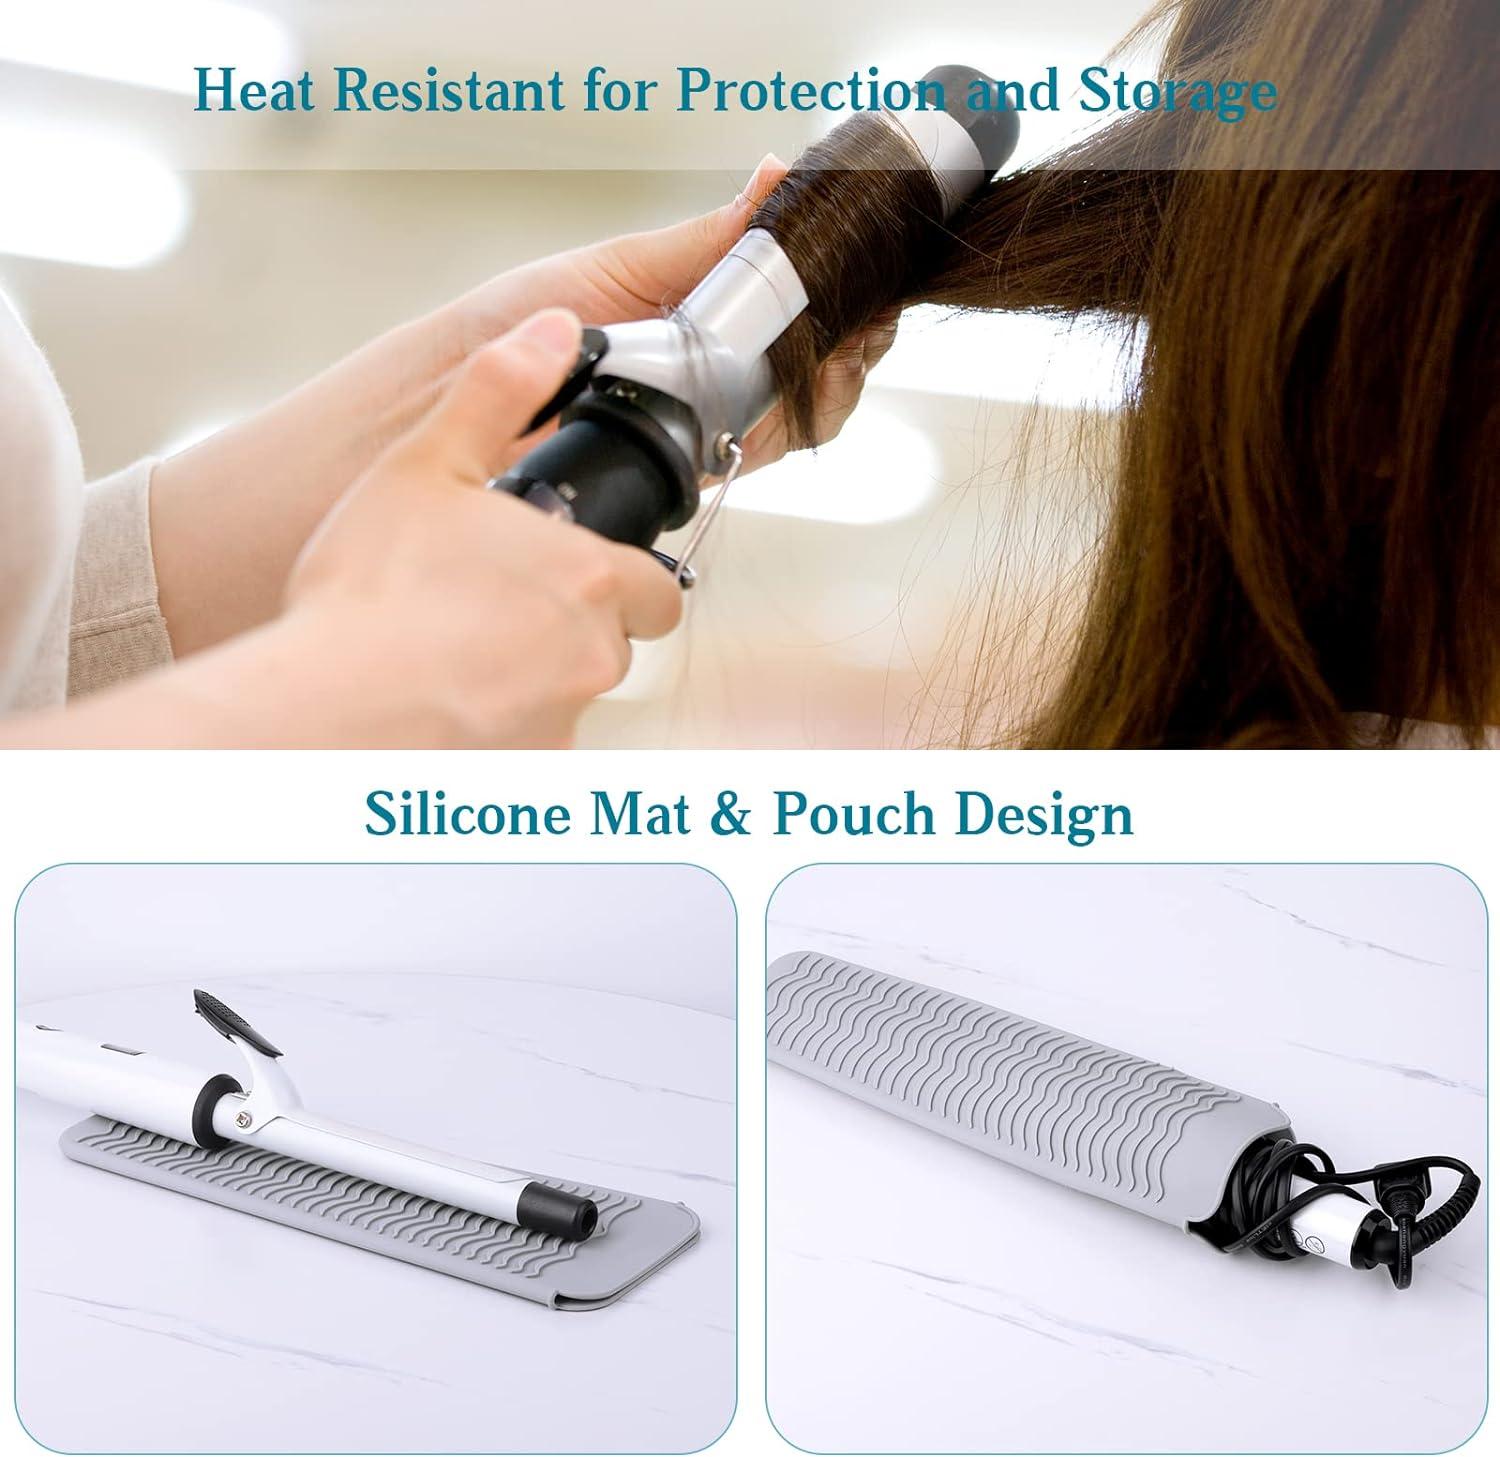 Silicone Heat Resistant Mat, Heat-resistant Silicone Mat Heat Resistant  Mat, Curling Iron Holder, Heat Mat For Curling Iron